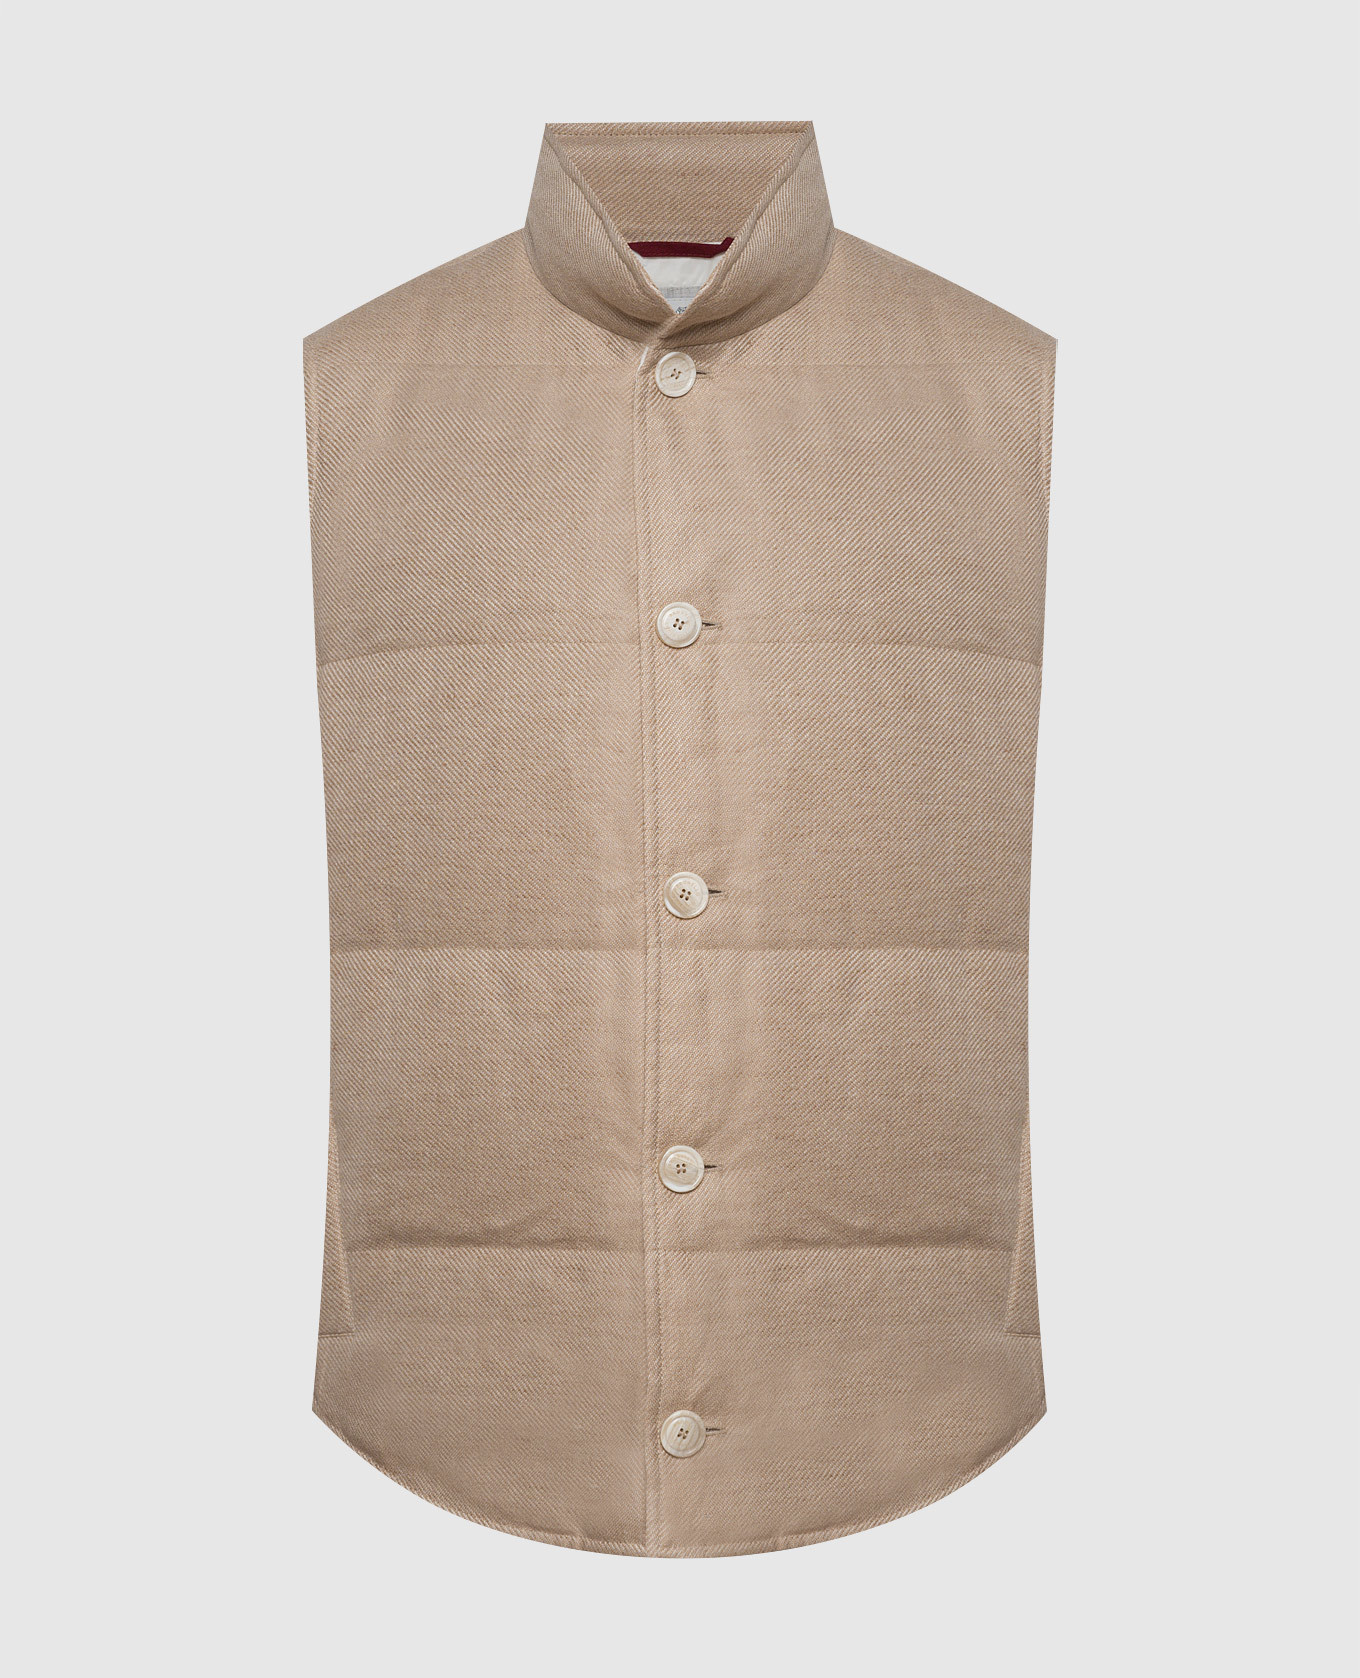 Beige down vest made of linen, wool and silk